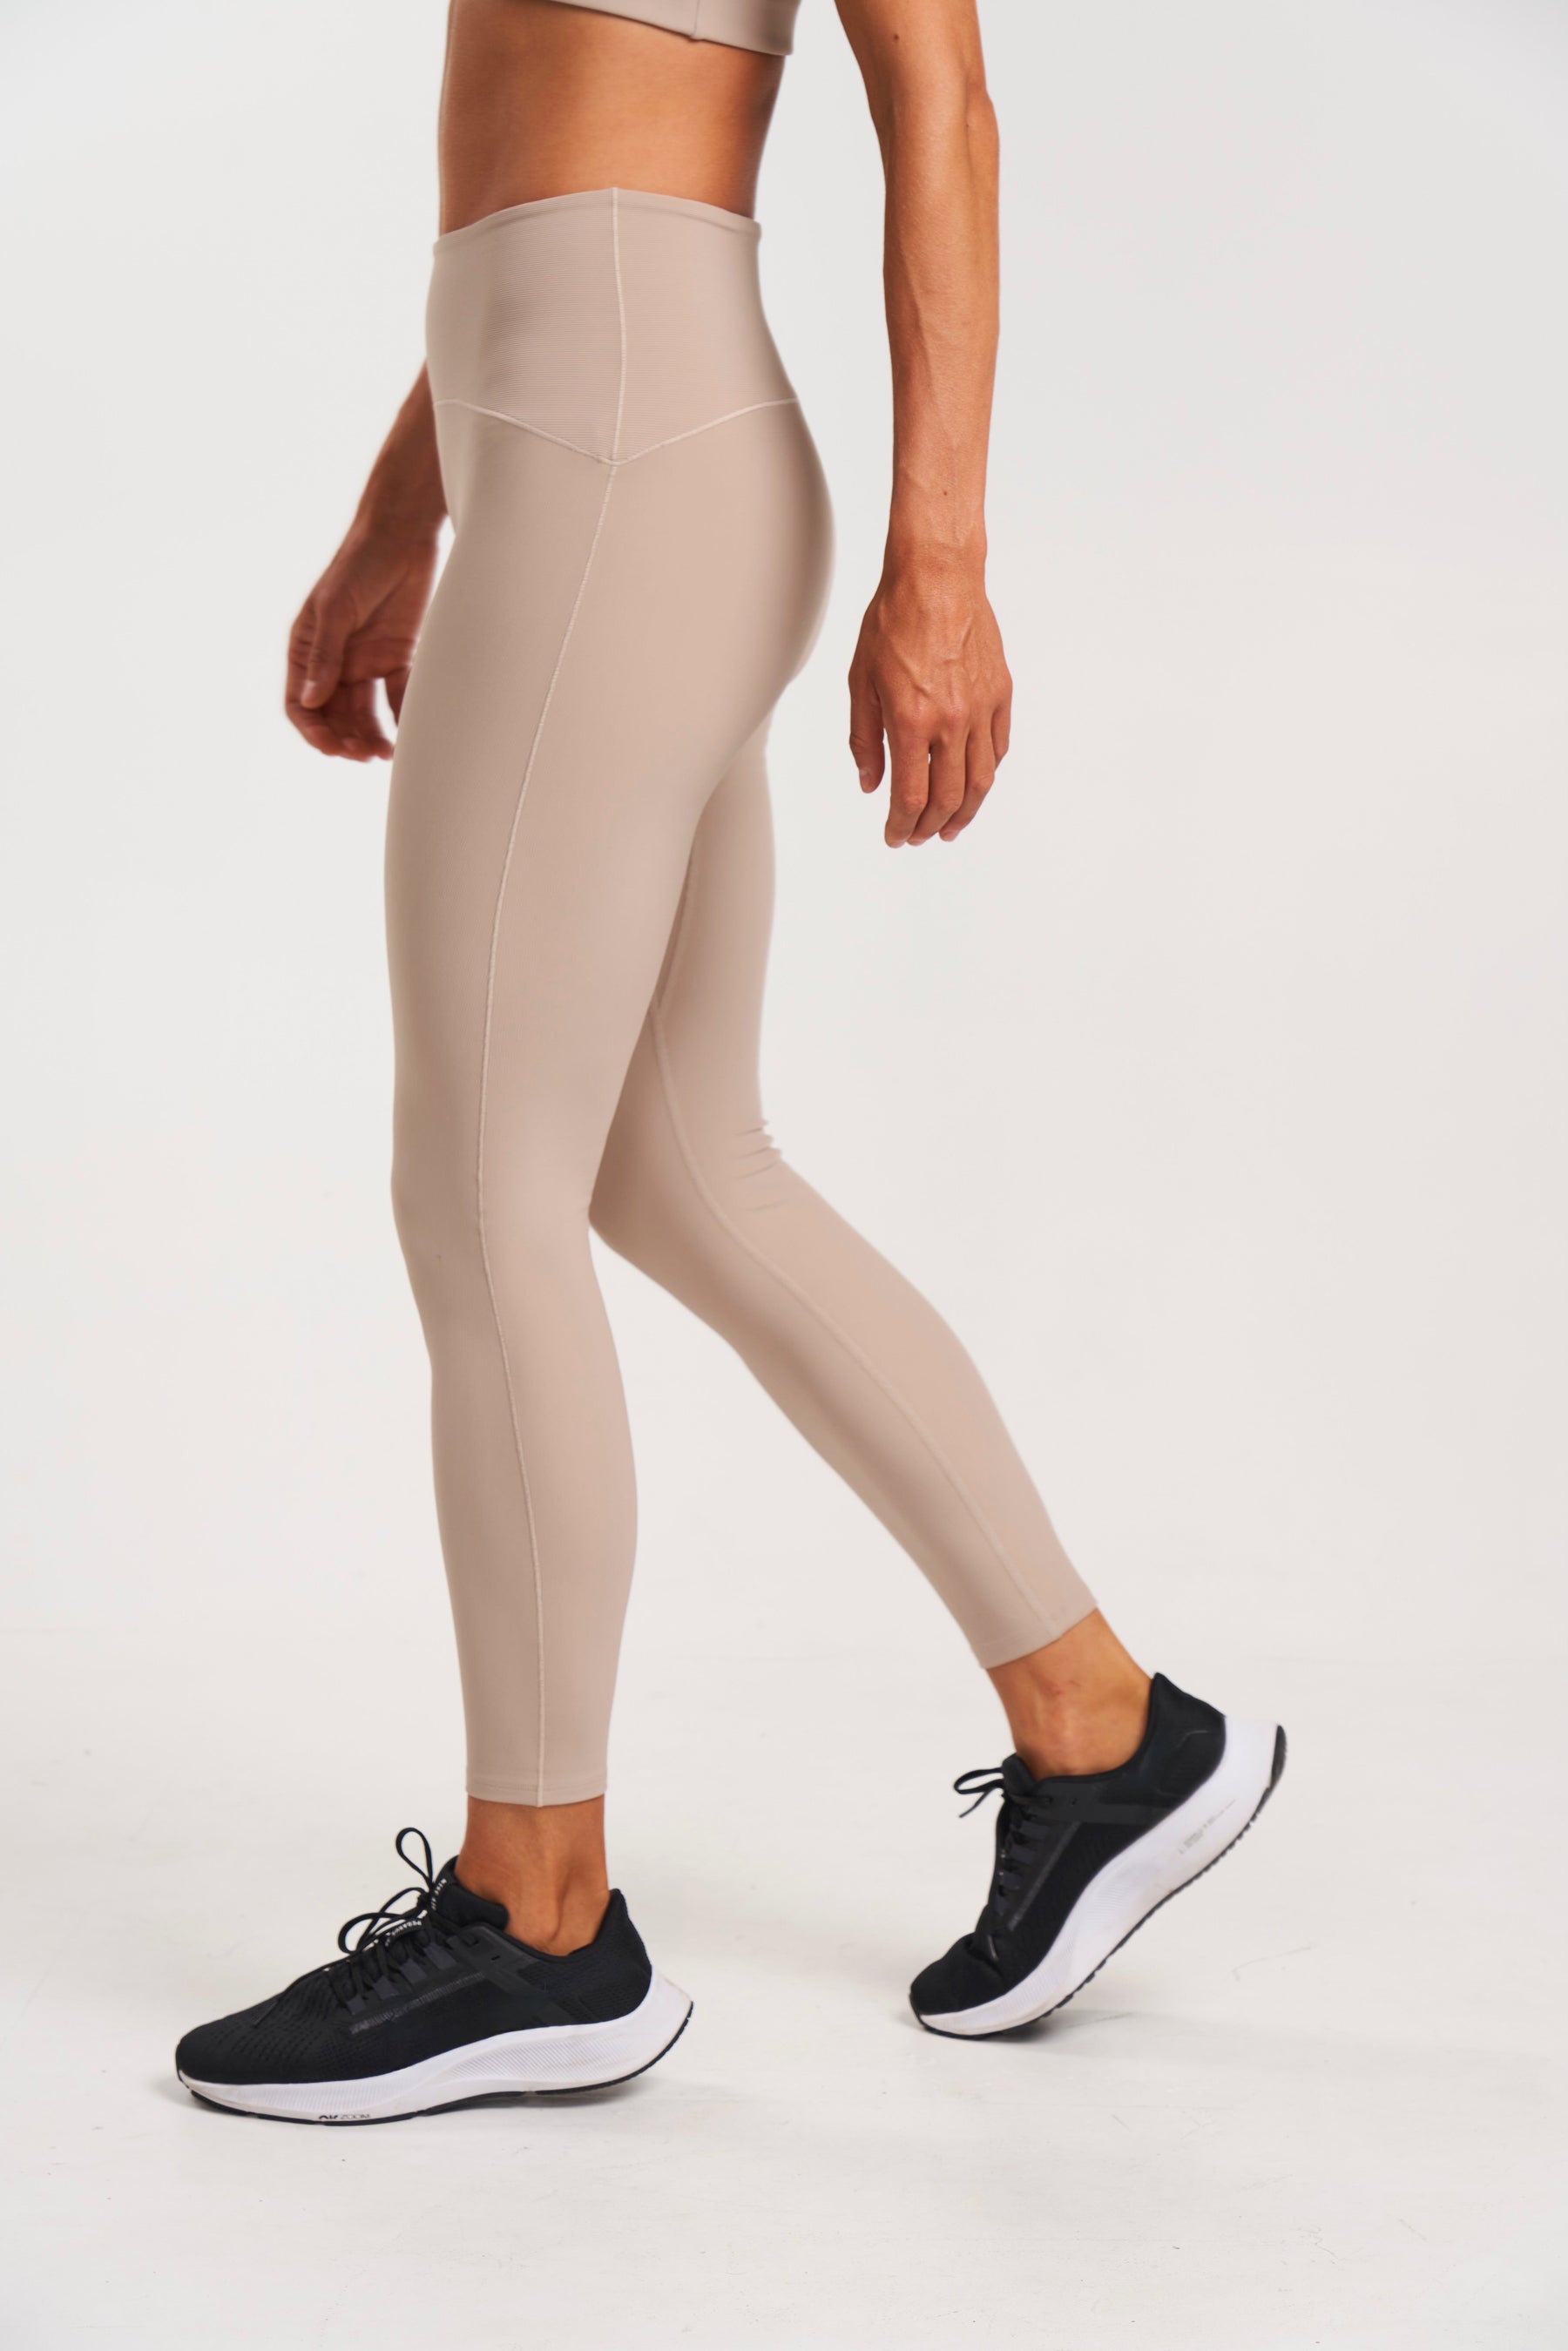 ethically produced workout leggings in beige